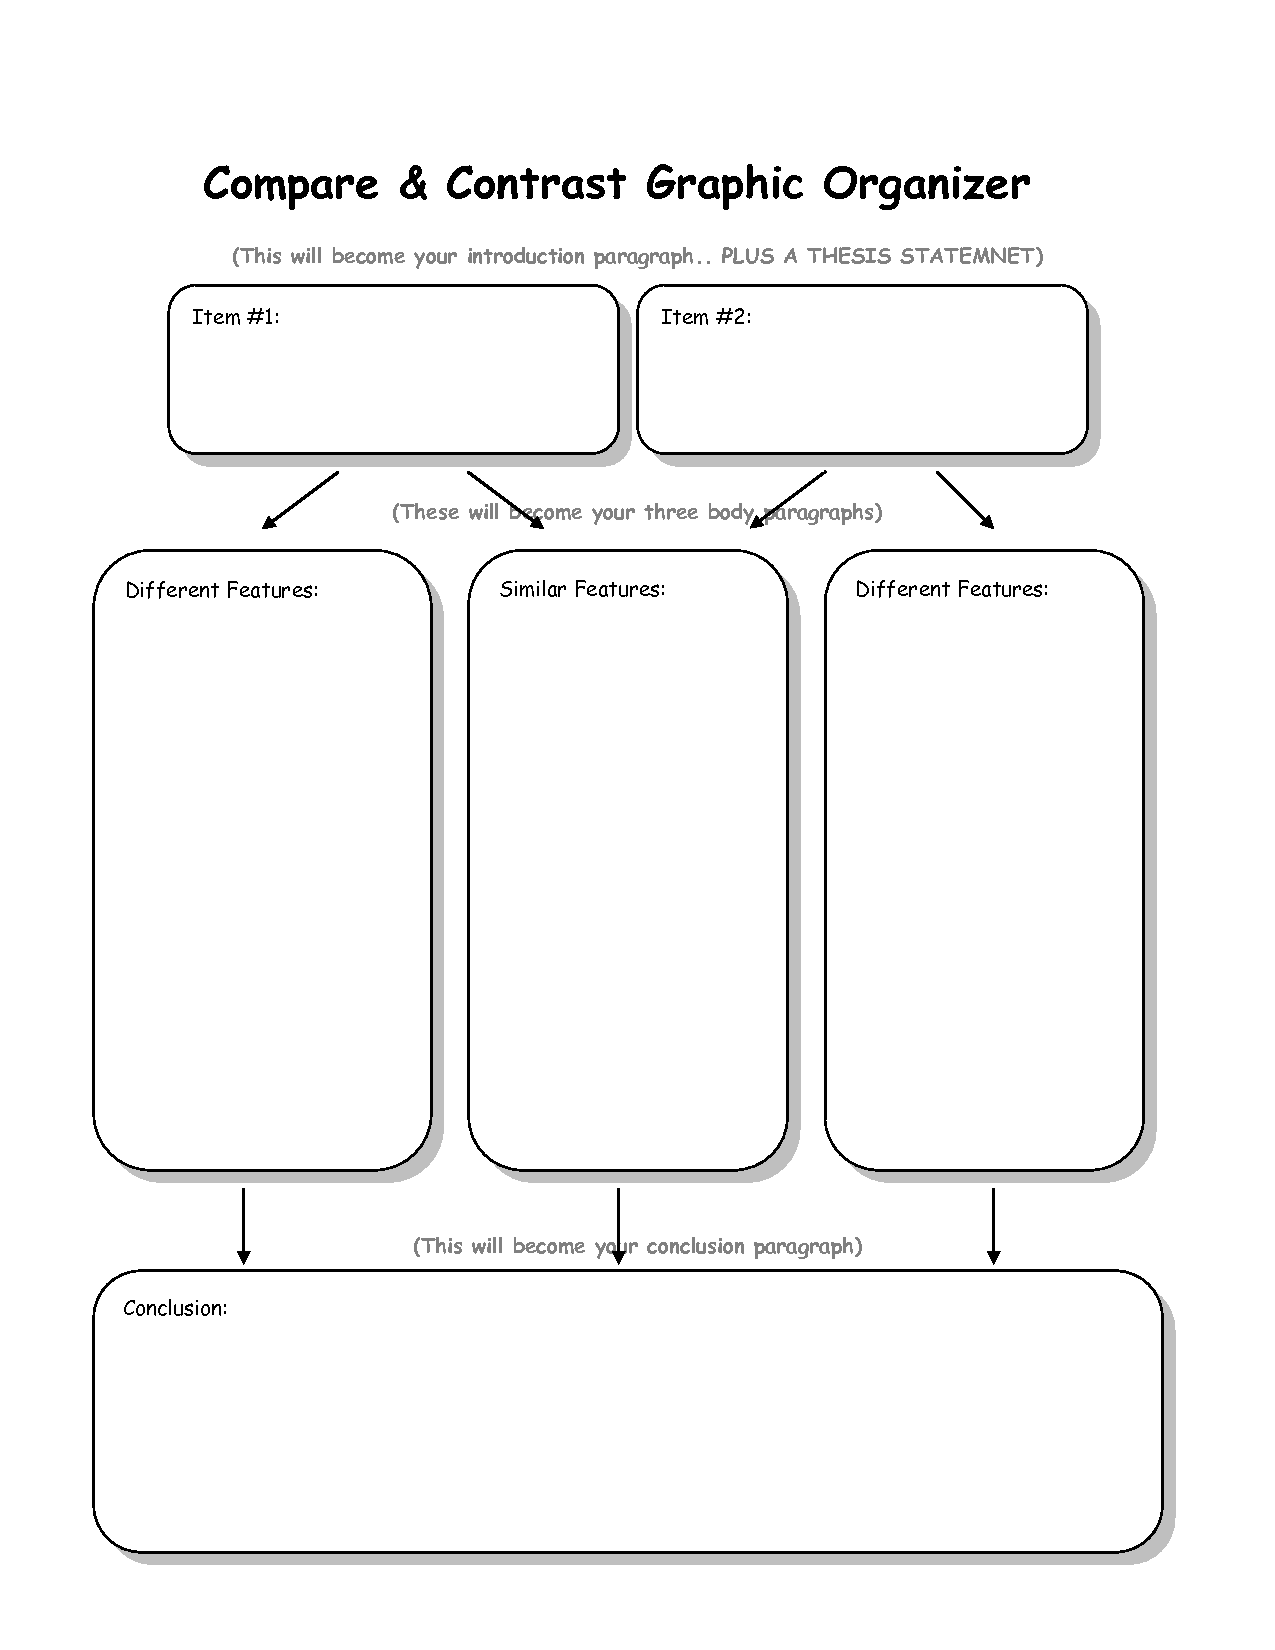 Comparing & Contrasting: Writing Anchor Chart & Graphic Organizers - The Curriculum Corner 